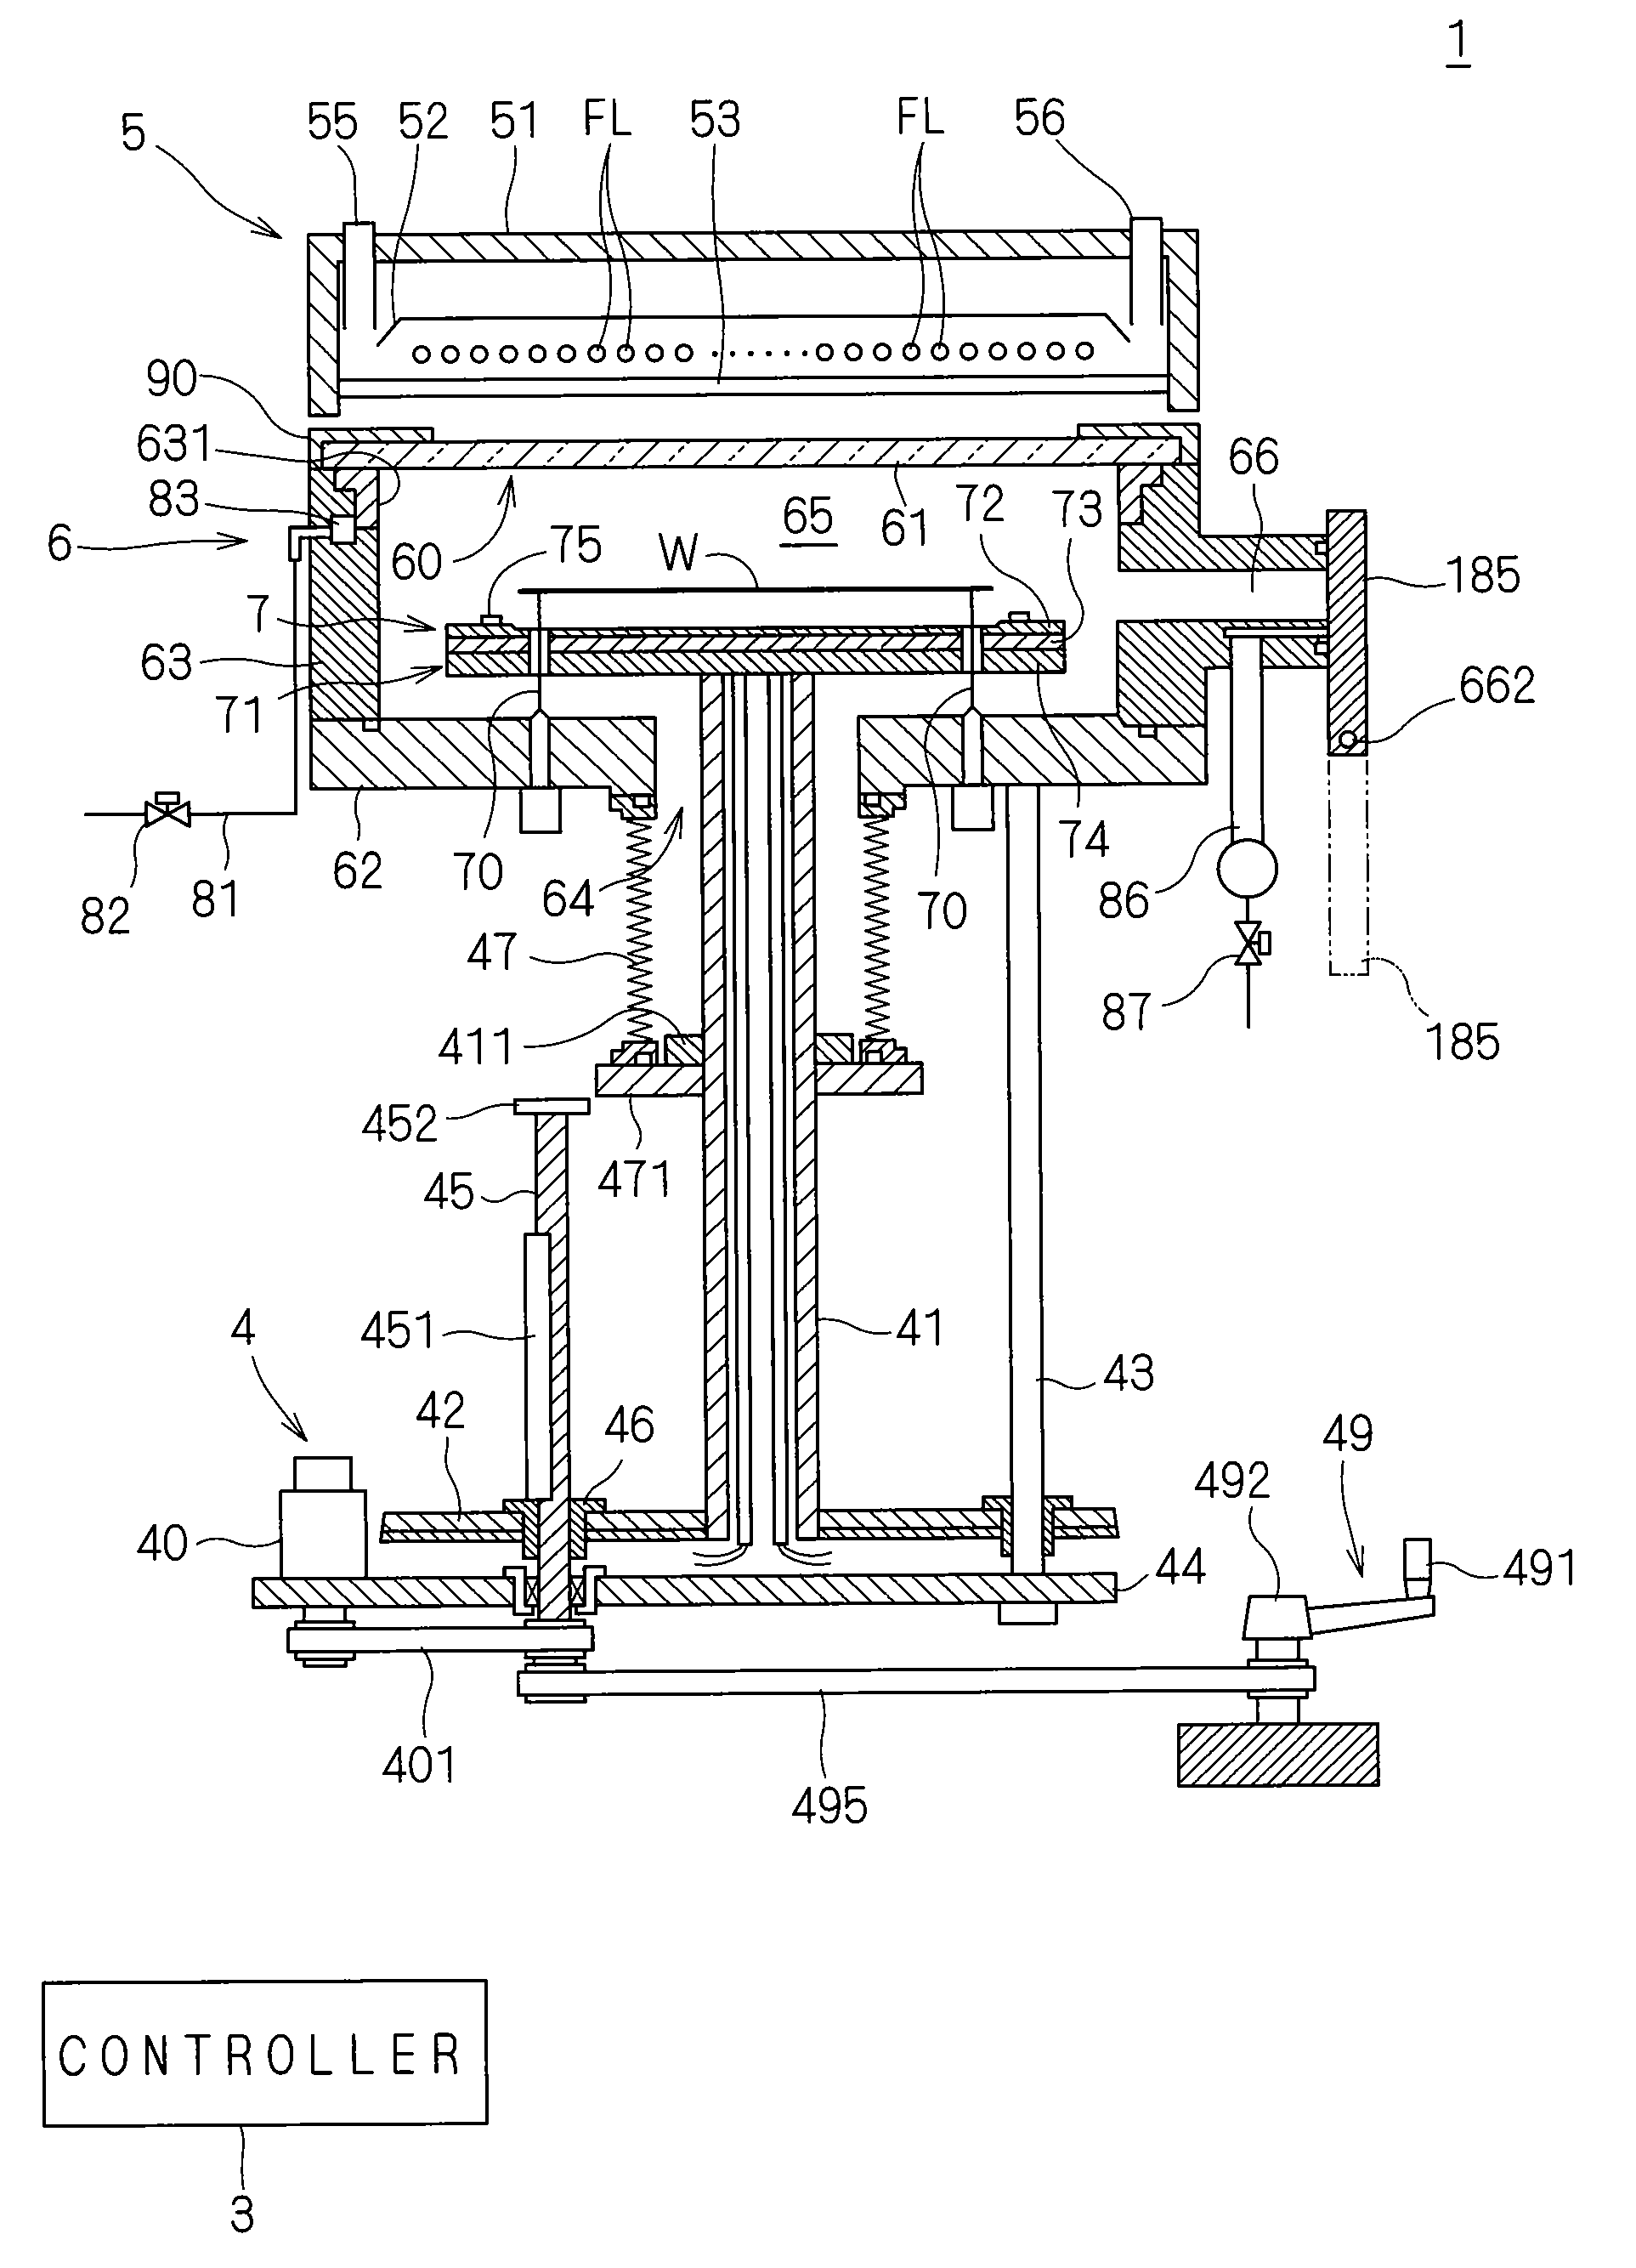 Heat treatment apparatus and method for heating substrate by light irradiation